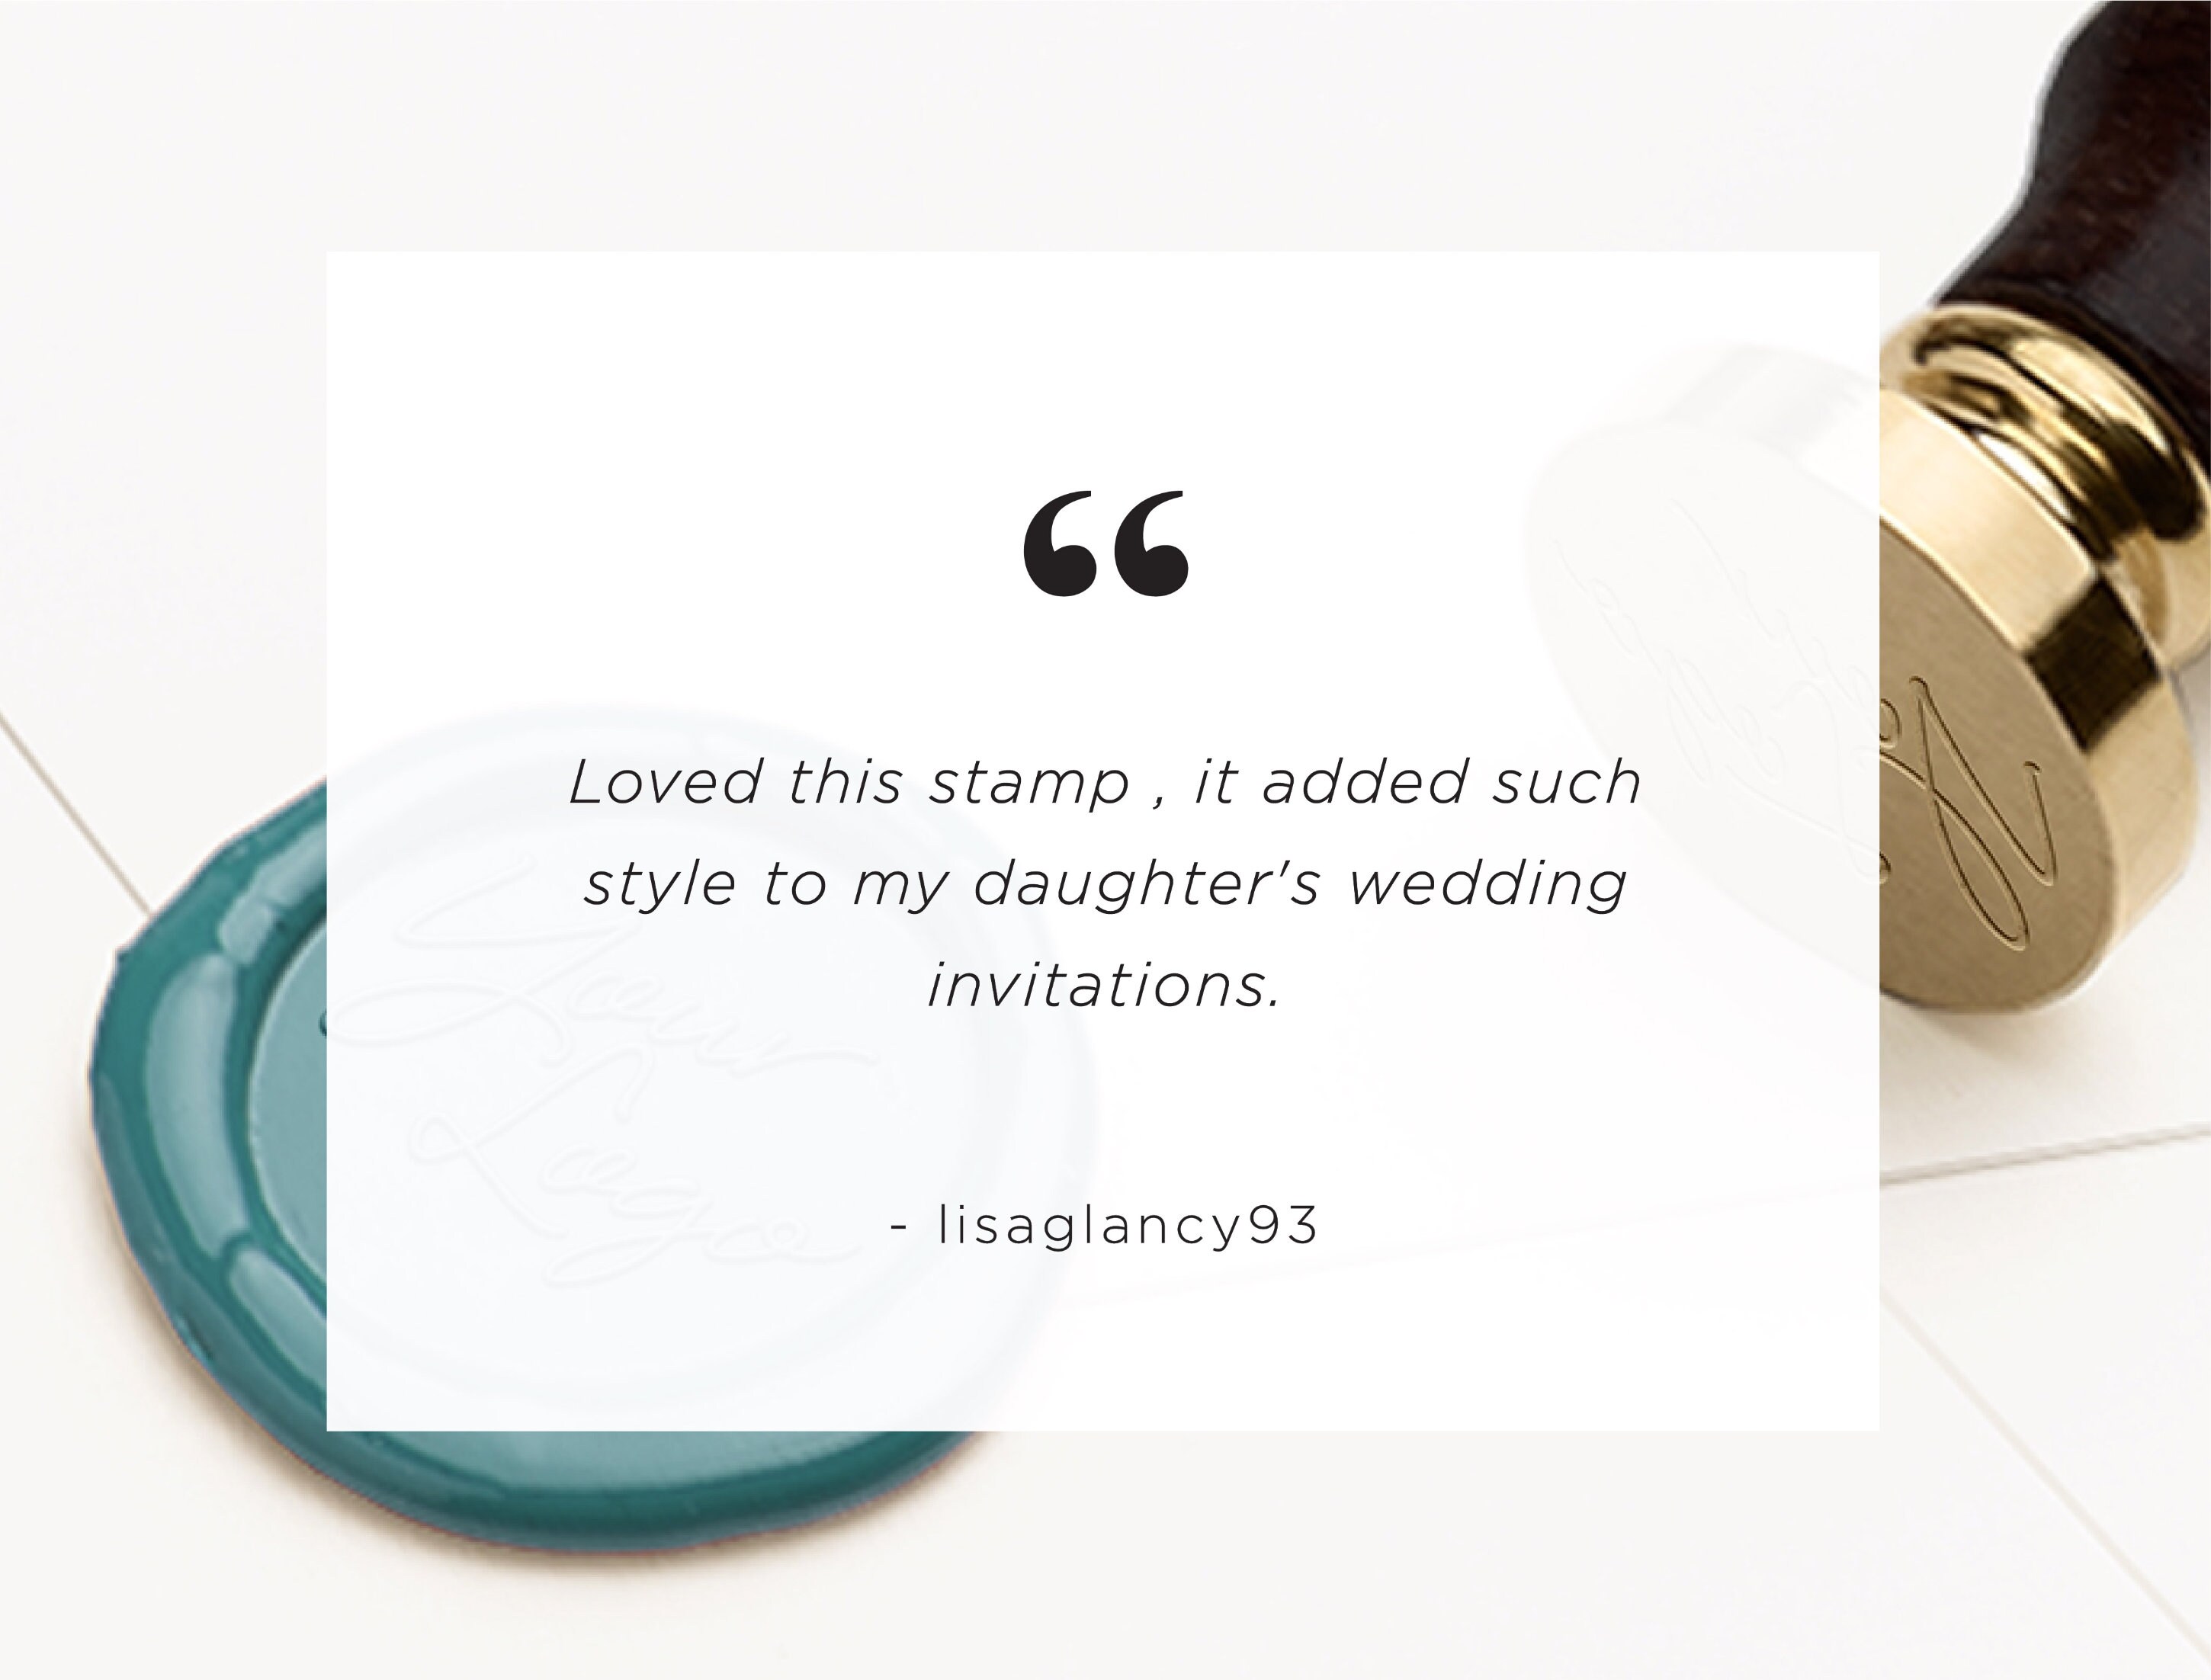 Signature Stamp with Name / Pocket Stamp 60x20 mm :: Online Stamp